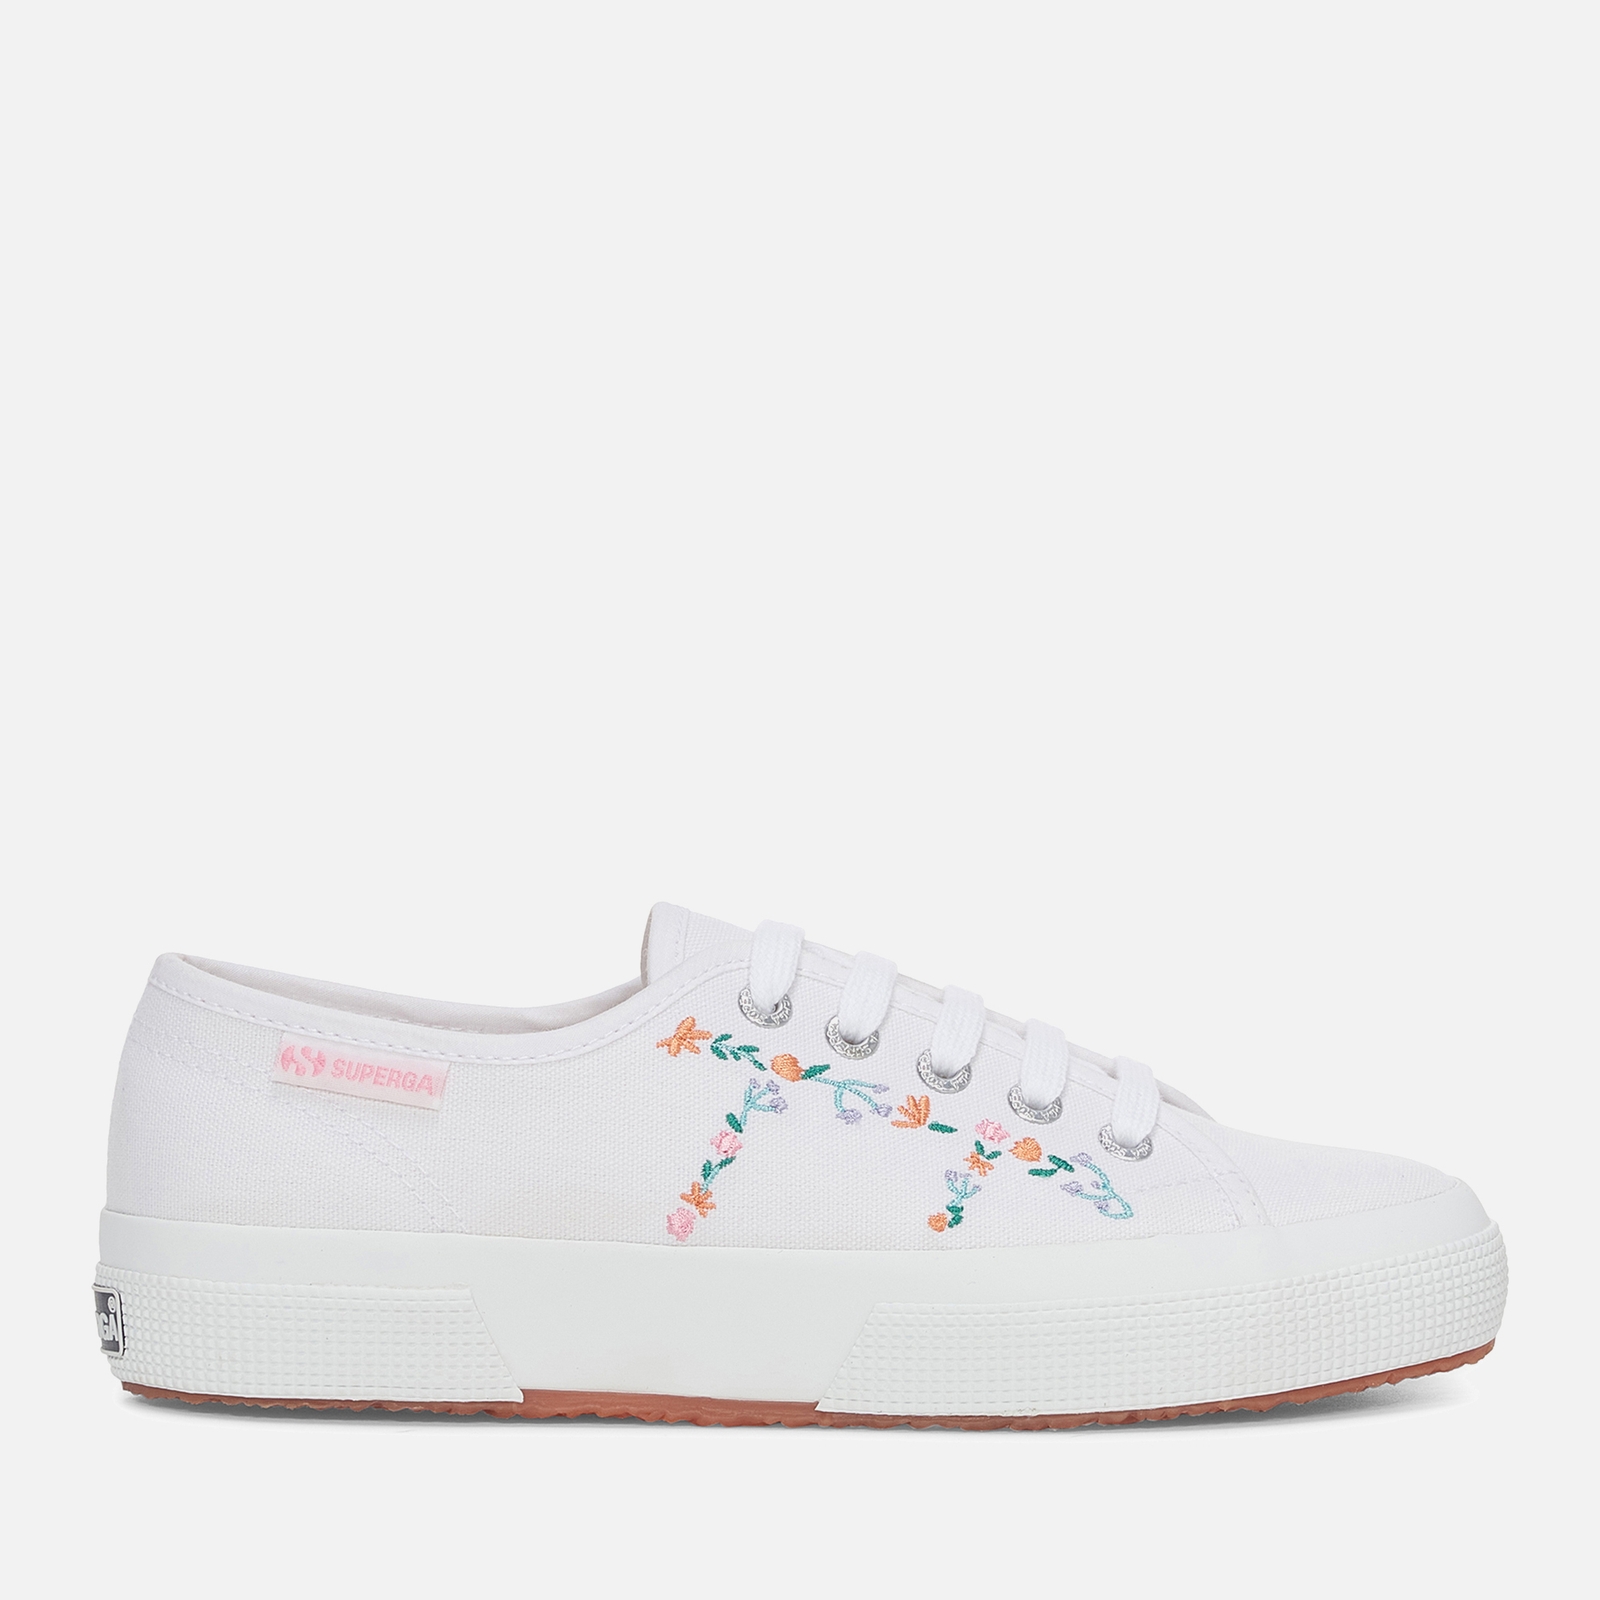 Superga Women's 2750 Floral-Embroidered Canvas Trainers